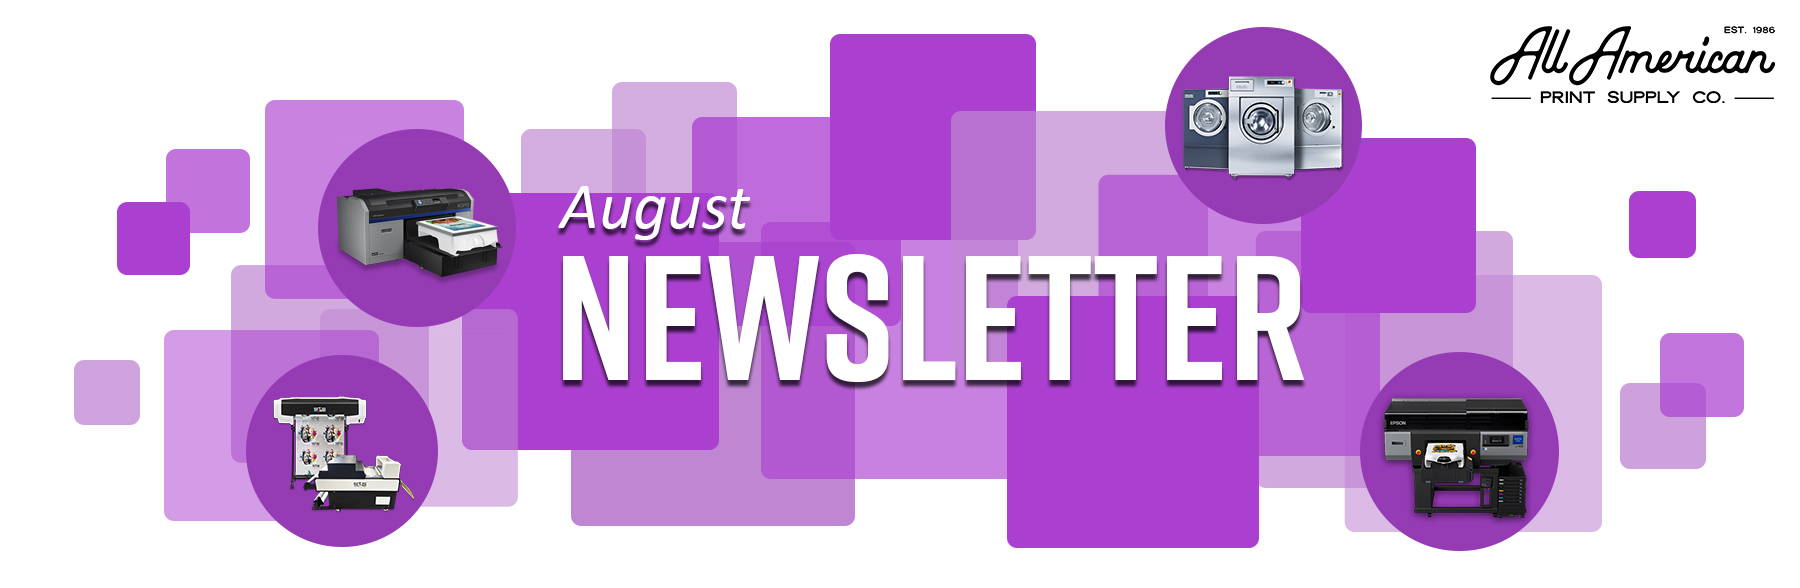 Printer Zone August 2022 Newsletter  Banner AA Print Supply Co.